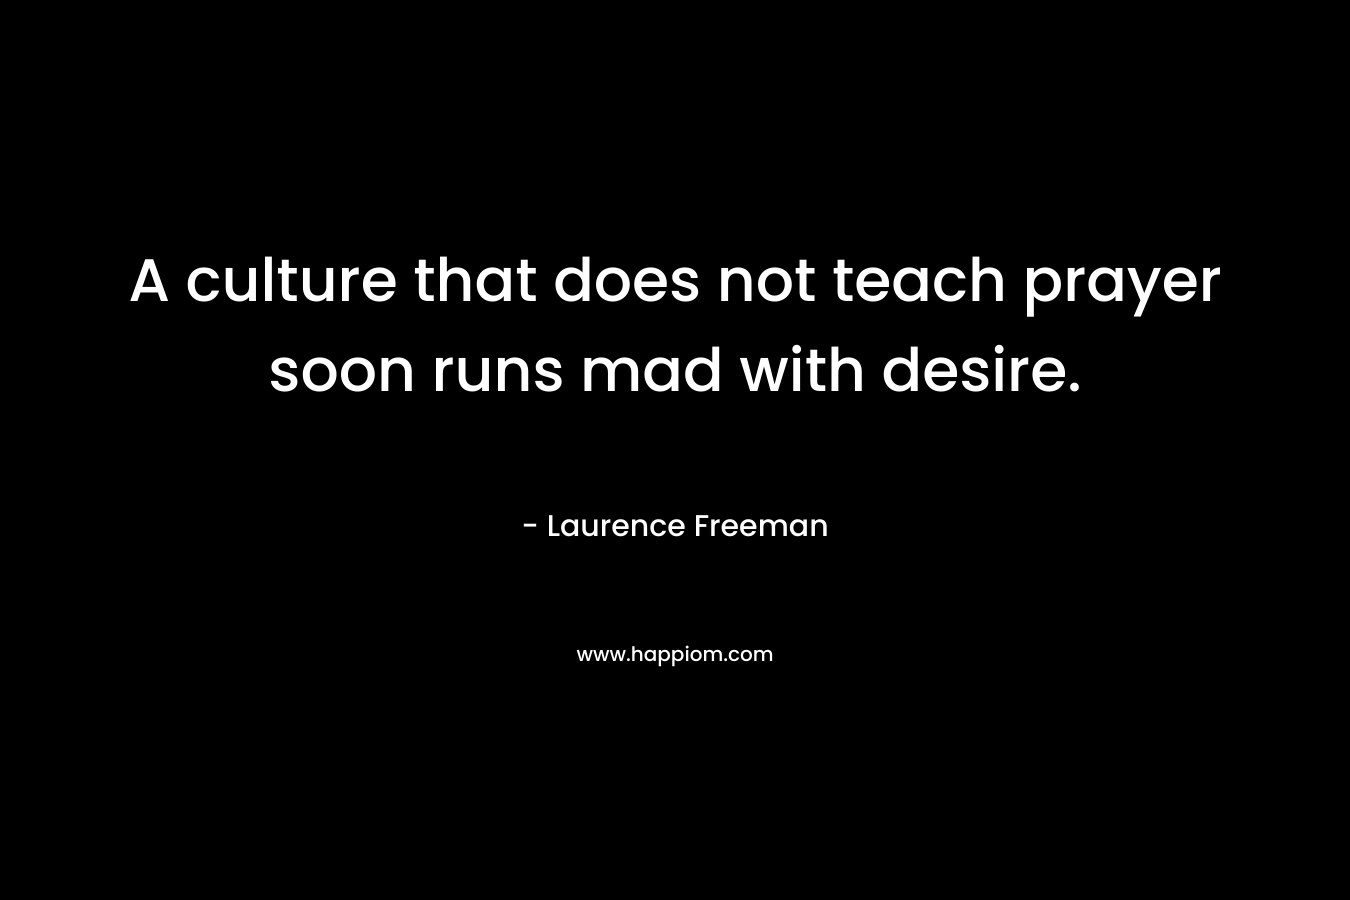 A culture that does not teach prayer soon runs mad with desire.